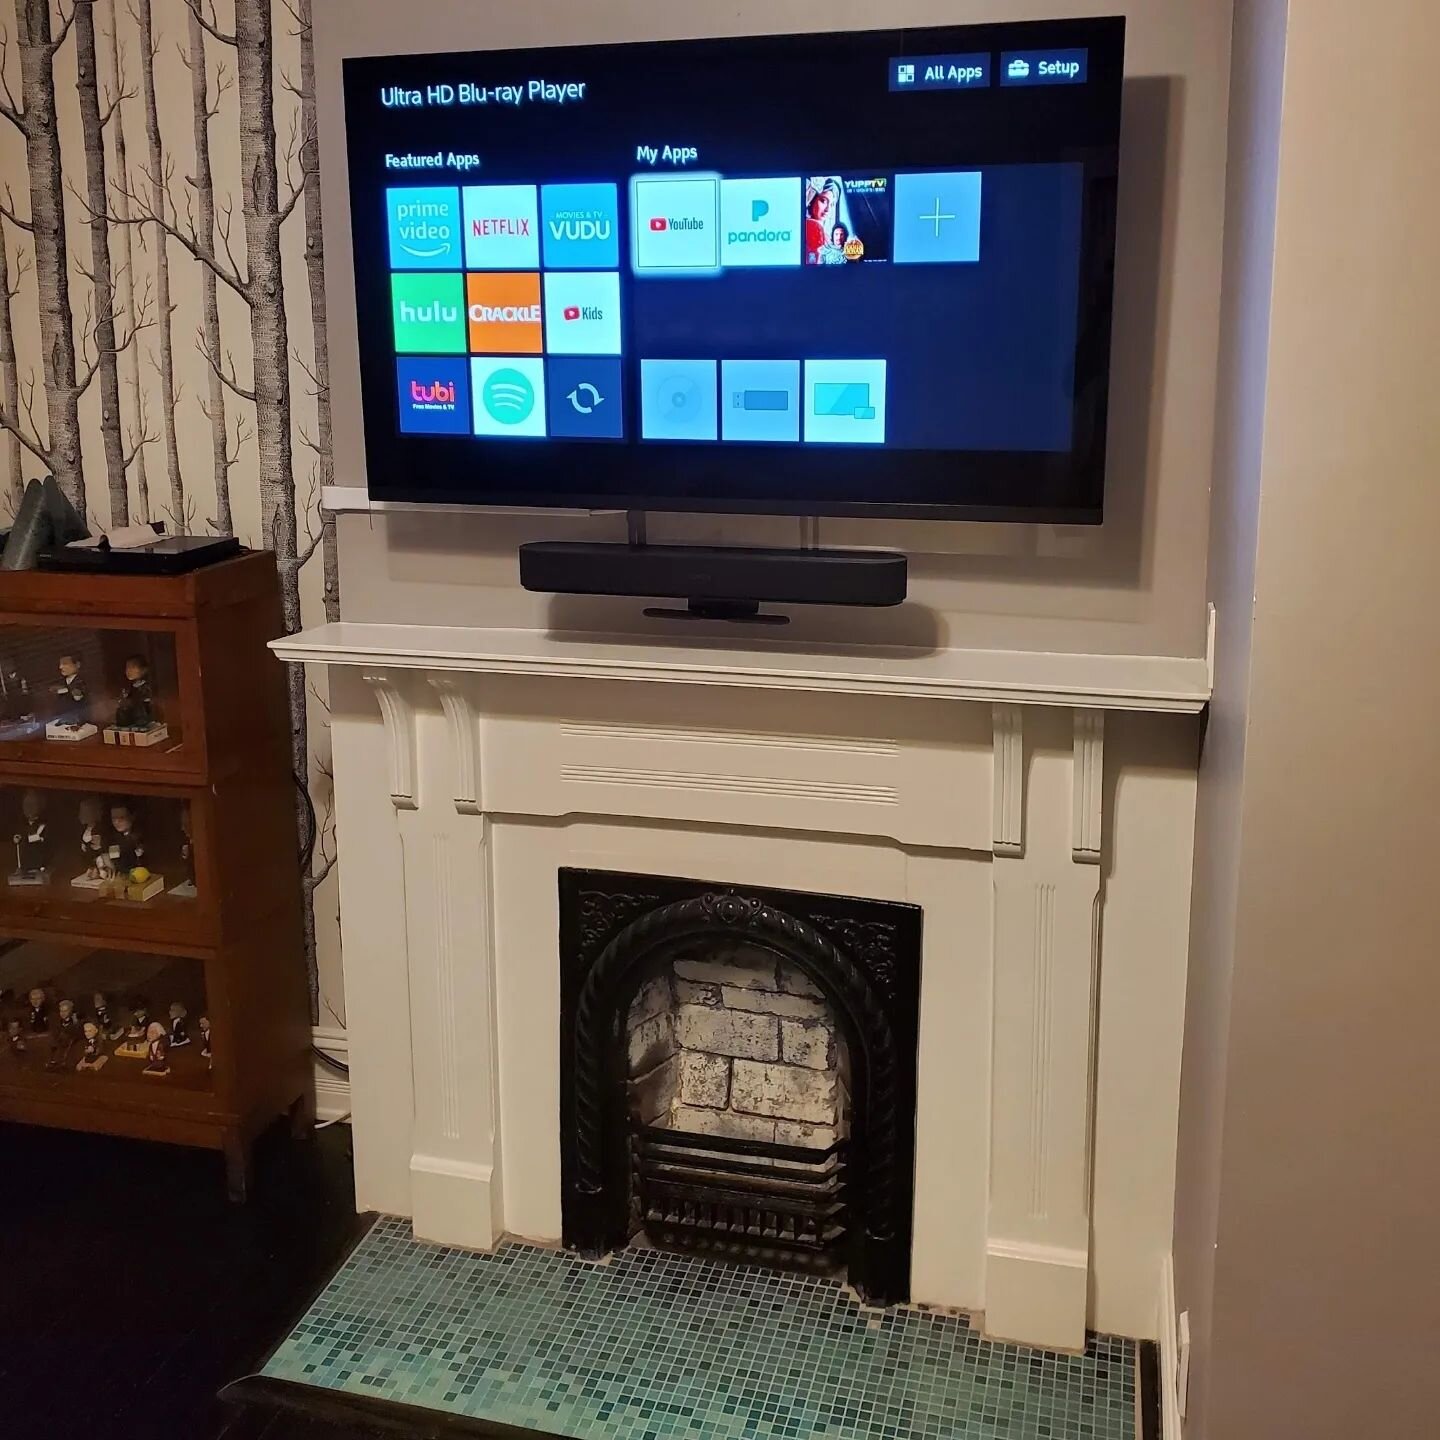 55&quot; @samsungus TV wall mounted with @sonos Beam soundbar system. @mantel_mount adjustable mount lowers TV below the mantle for optimal viewing

#quality #clarity #craftsmanship #jaaudiorva #audiovisual #audio #video #media #construction #firepla